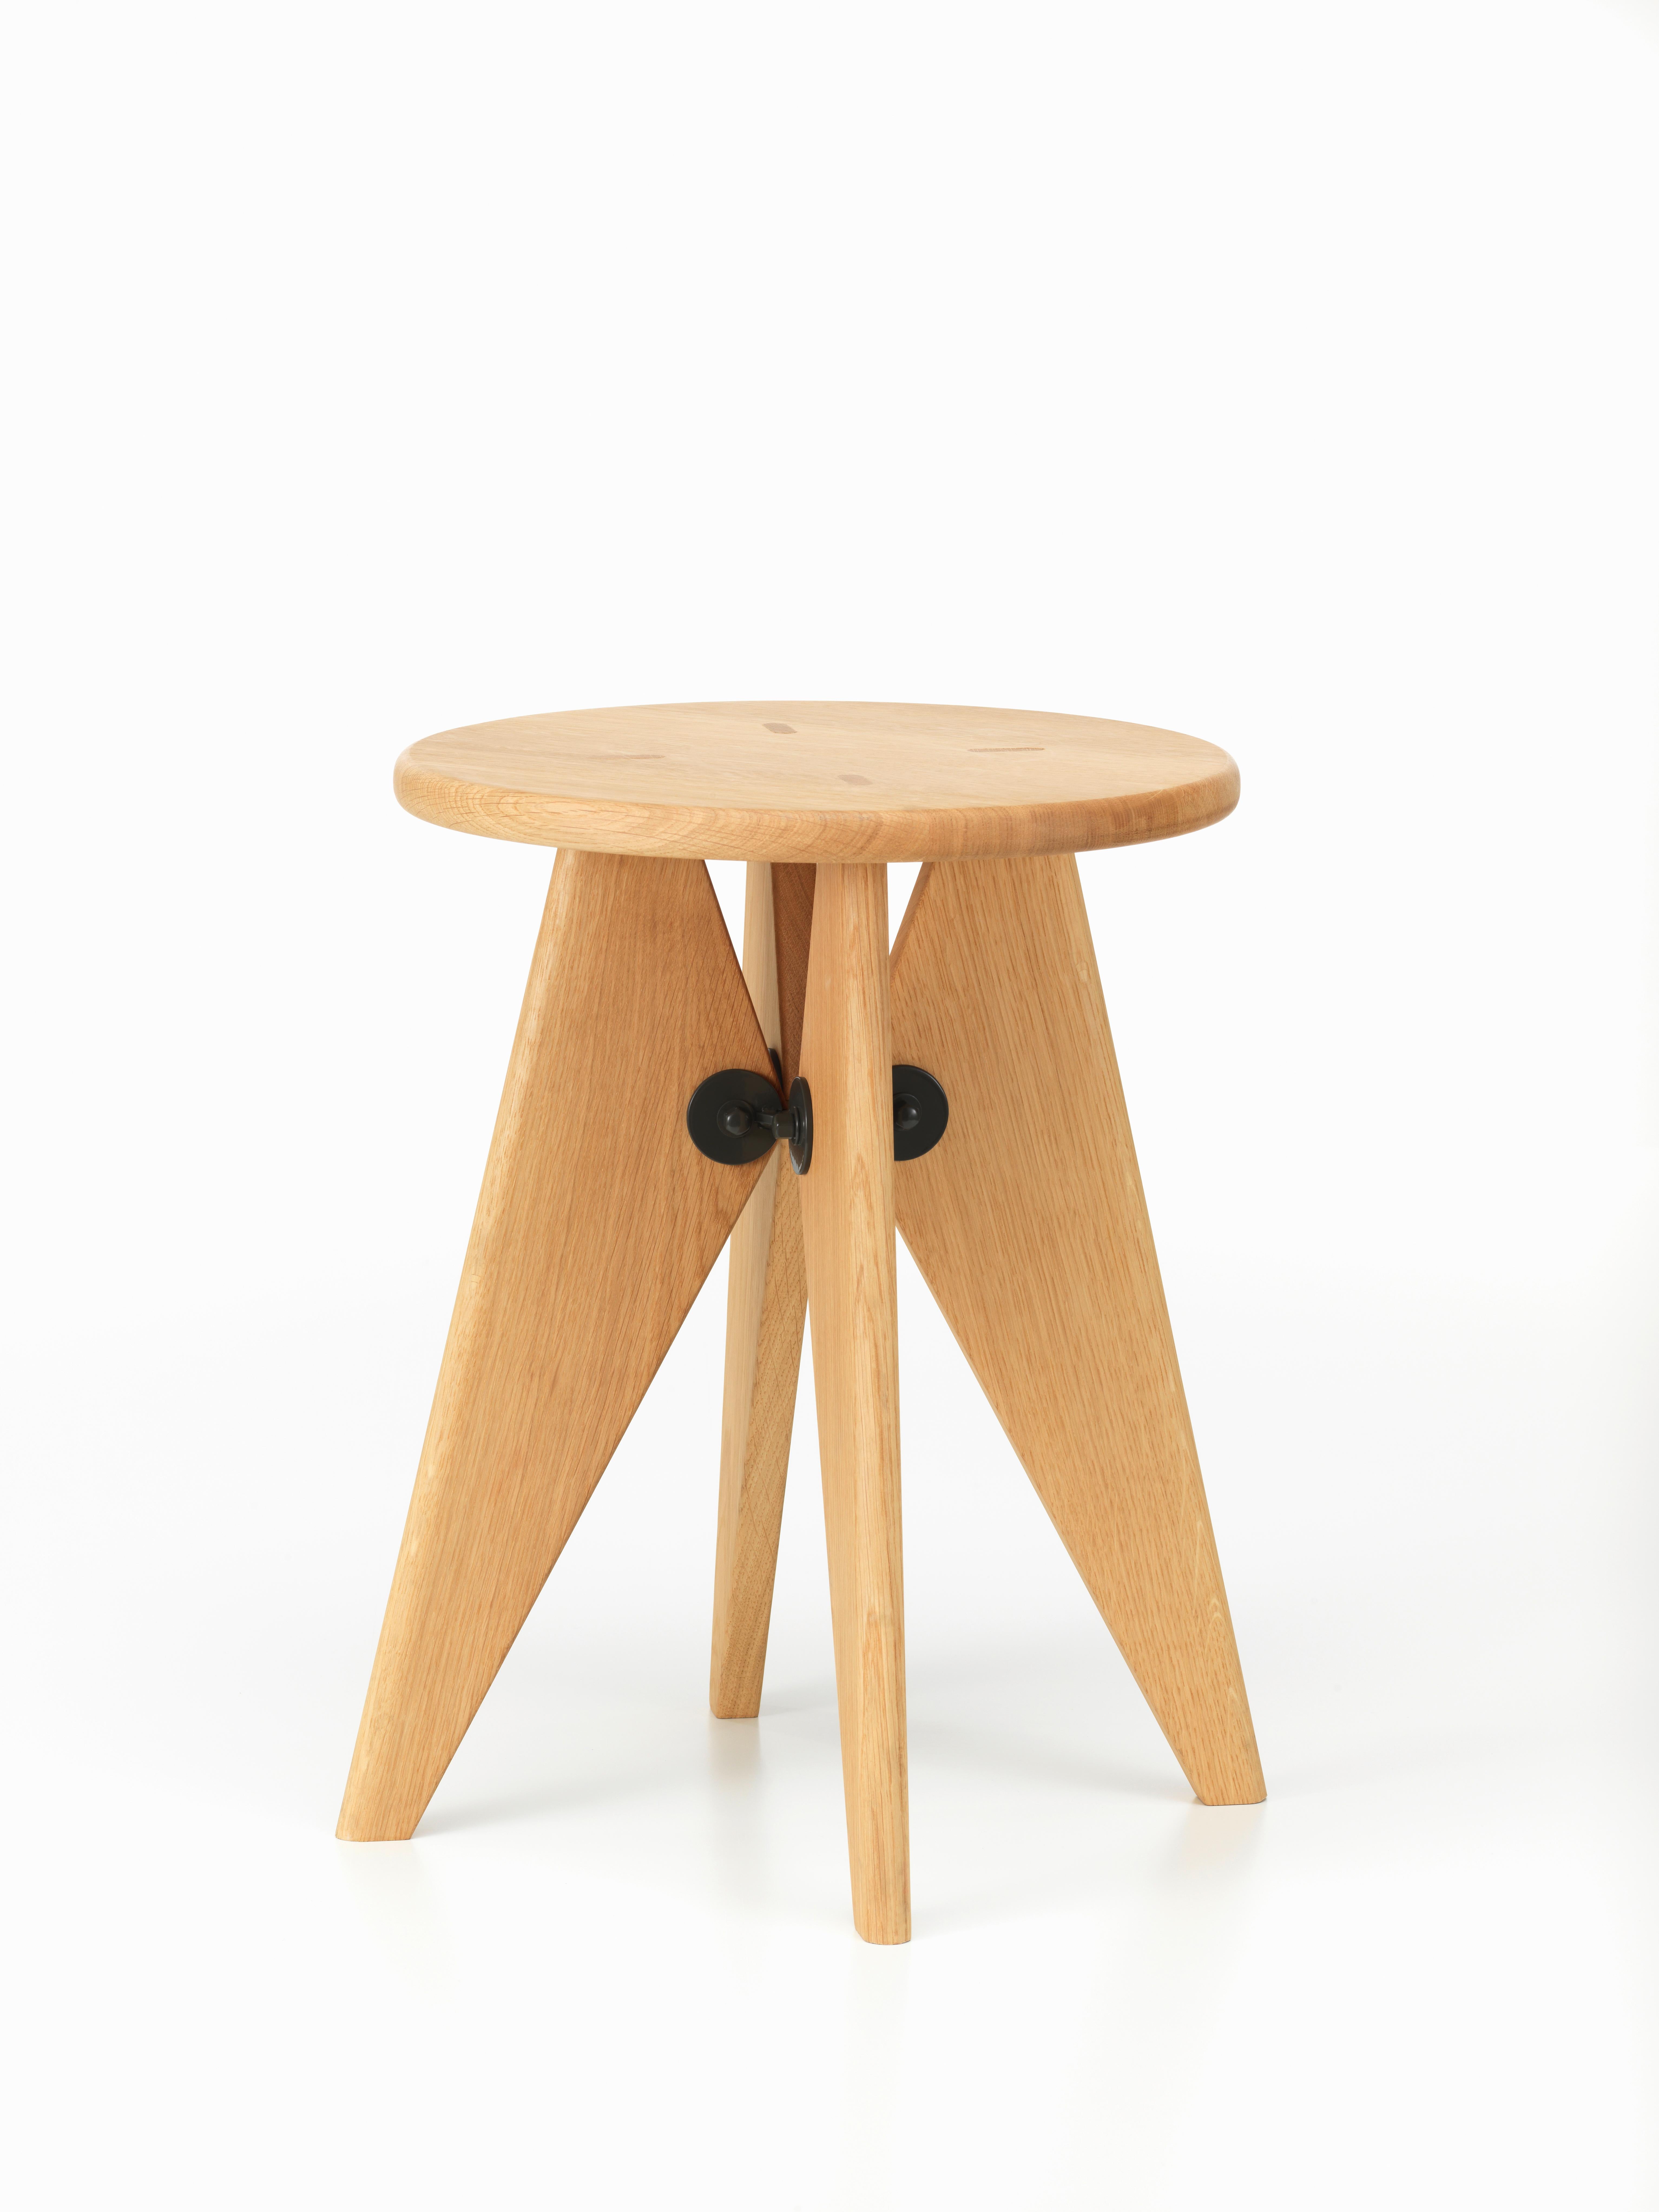 Modern Vitra Tabouret Solvay Stool in Natural Oak by Jean Prouvé For Sale